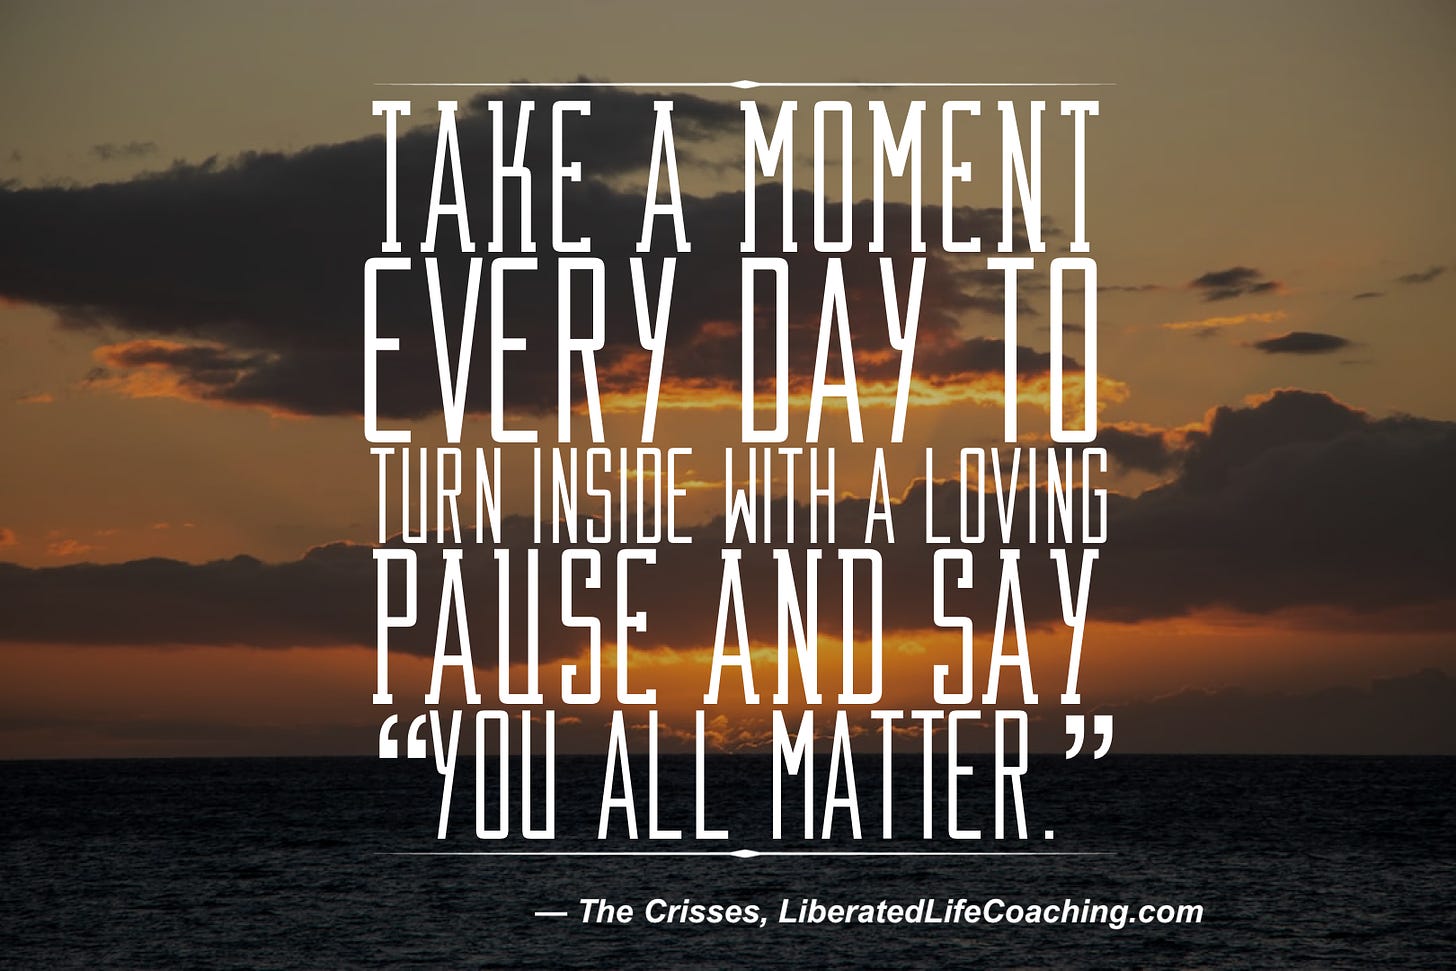 On a dark sunset background, text reads: Take a moment every day to turn inside with a loving pause and say: “You all matter.” — The Crisses, LiberatedLifeCoaching.com